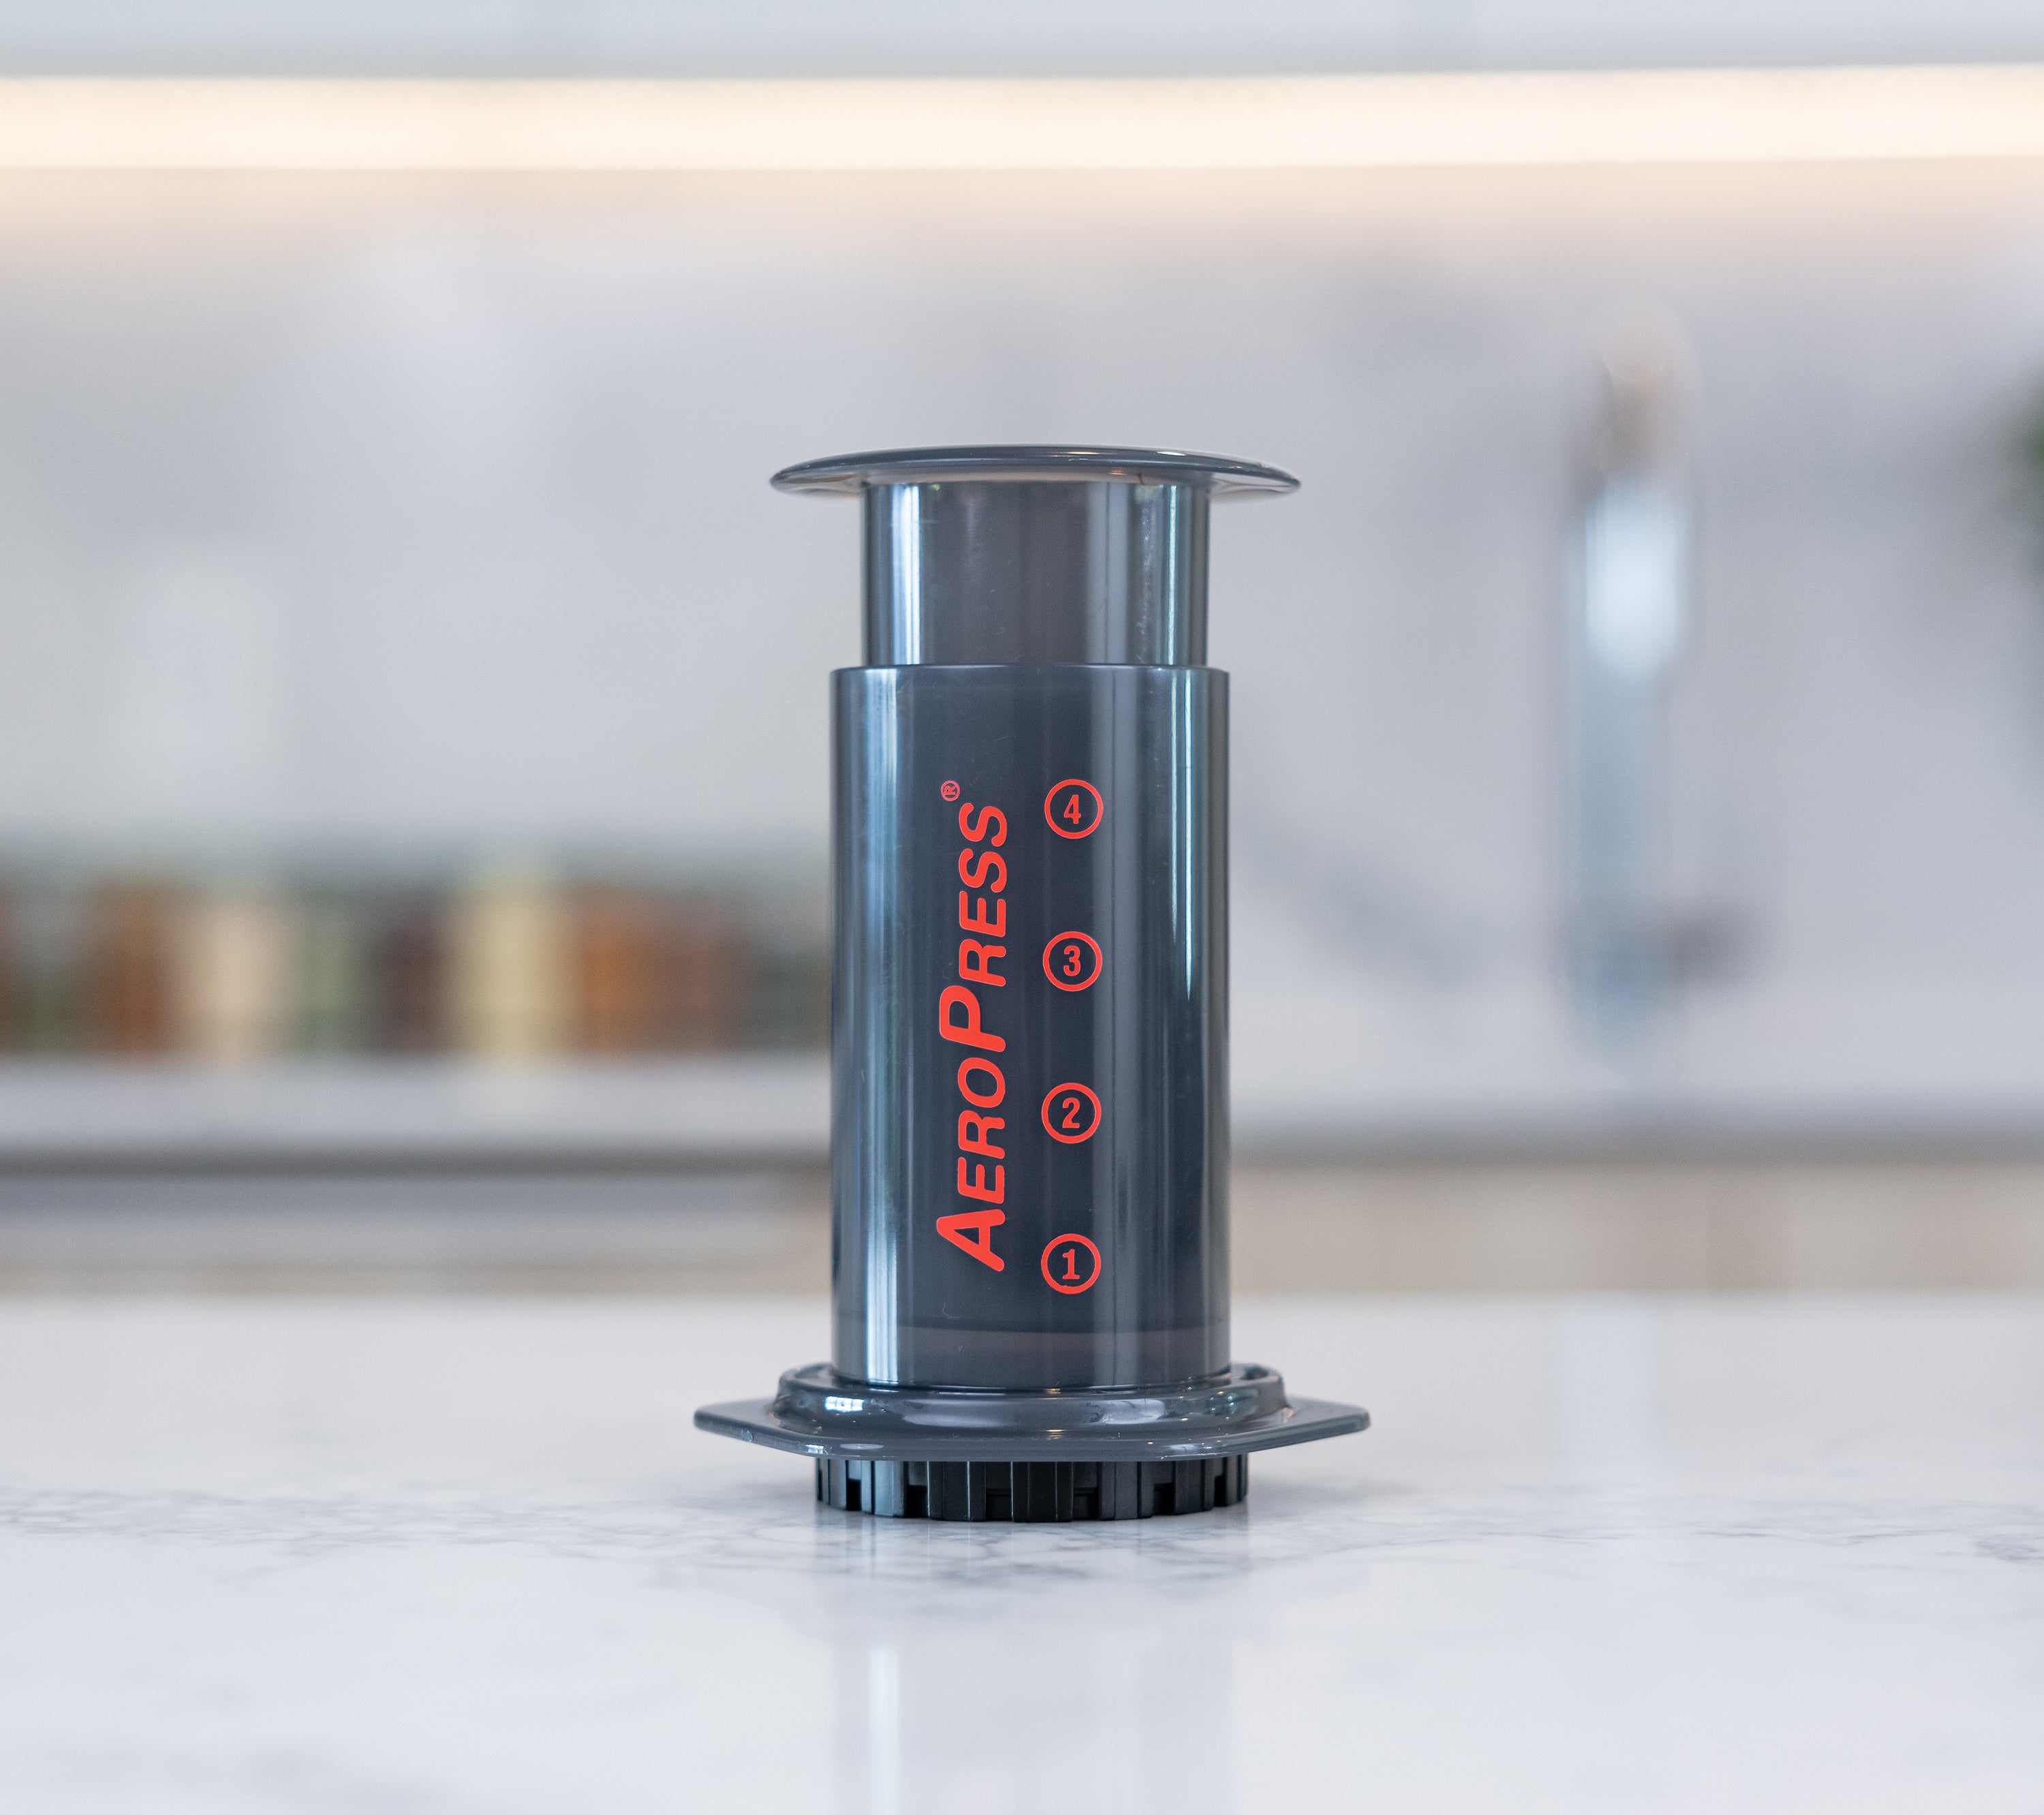 AeroPress Original Coffee maker takes up less space in your kitchen. Photo credit: Artisan Assets